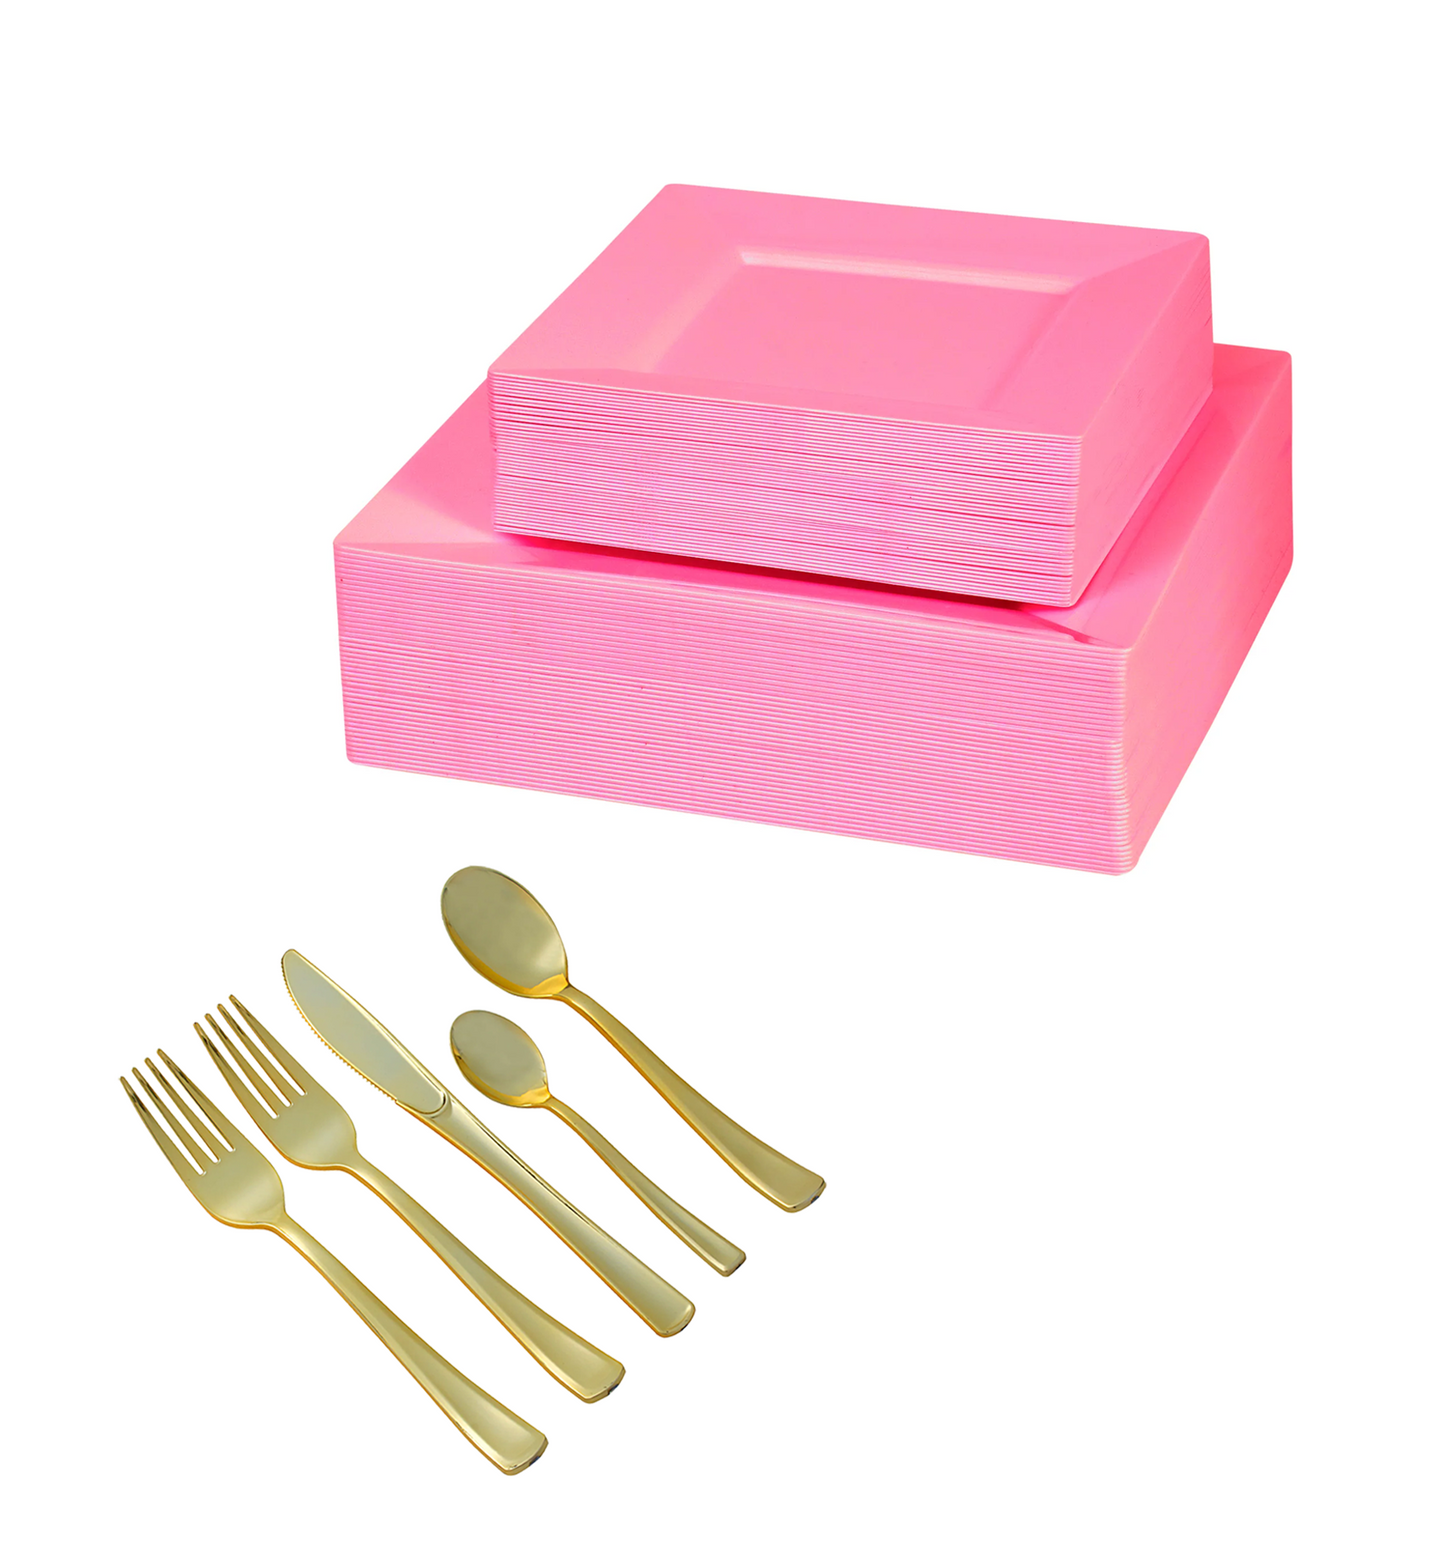 330 -Piece pink square dinnerware set for 40 guests Includes: 80 pink square plastic plates & 250 plastic gold silverware utensils